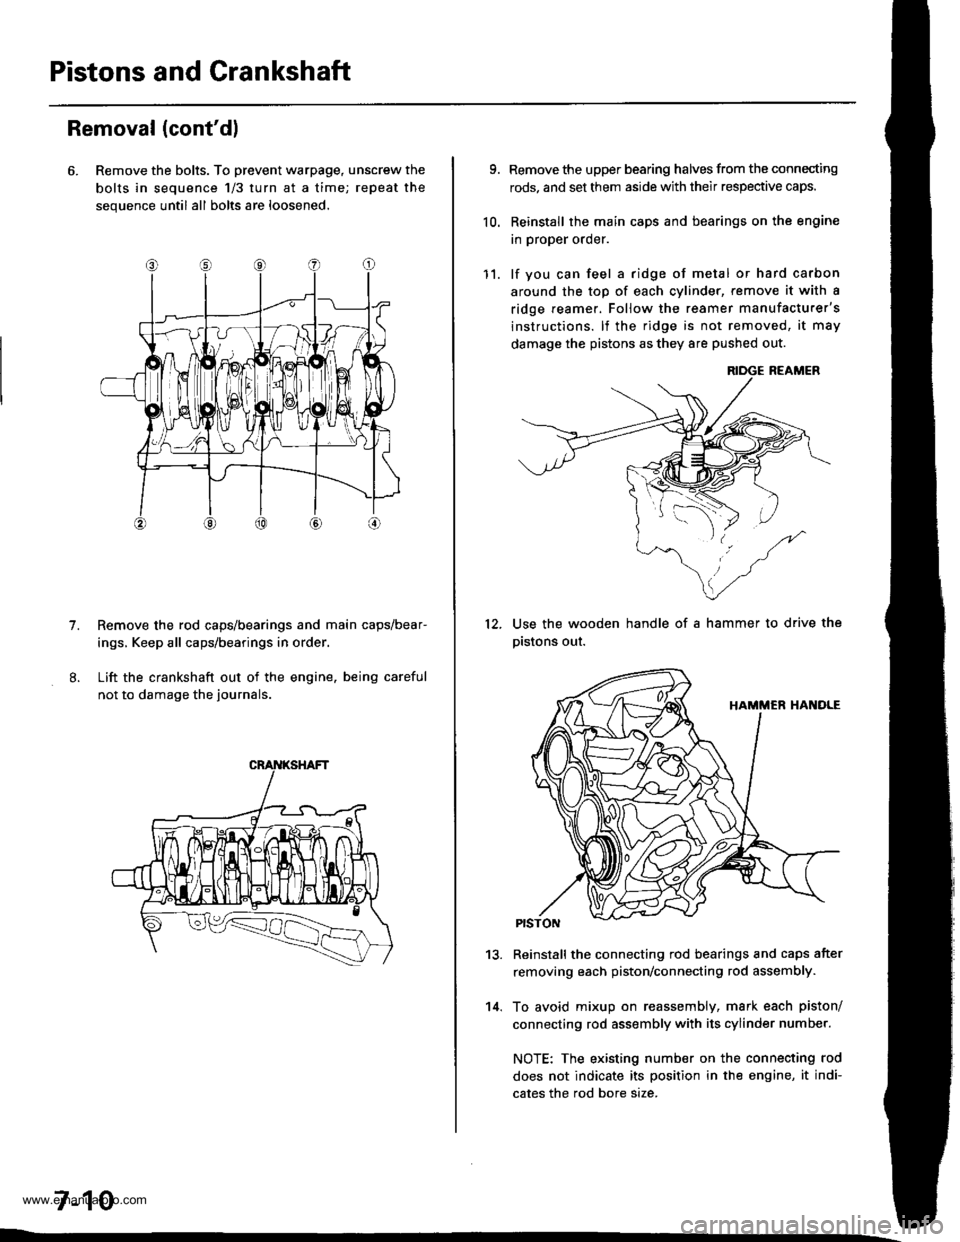 HONDA CR-V 1997 RD1-RD3 / 1.G Workshop Manual 
Pistons and Crankshaft
Removal (contdl
6. Remove the bolts. To prevent warpage, unscrew the
bolts in sequence 1/3 turn at a time; repeat the
sequence until all bolts are loosened.
Remove the rod cap